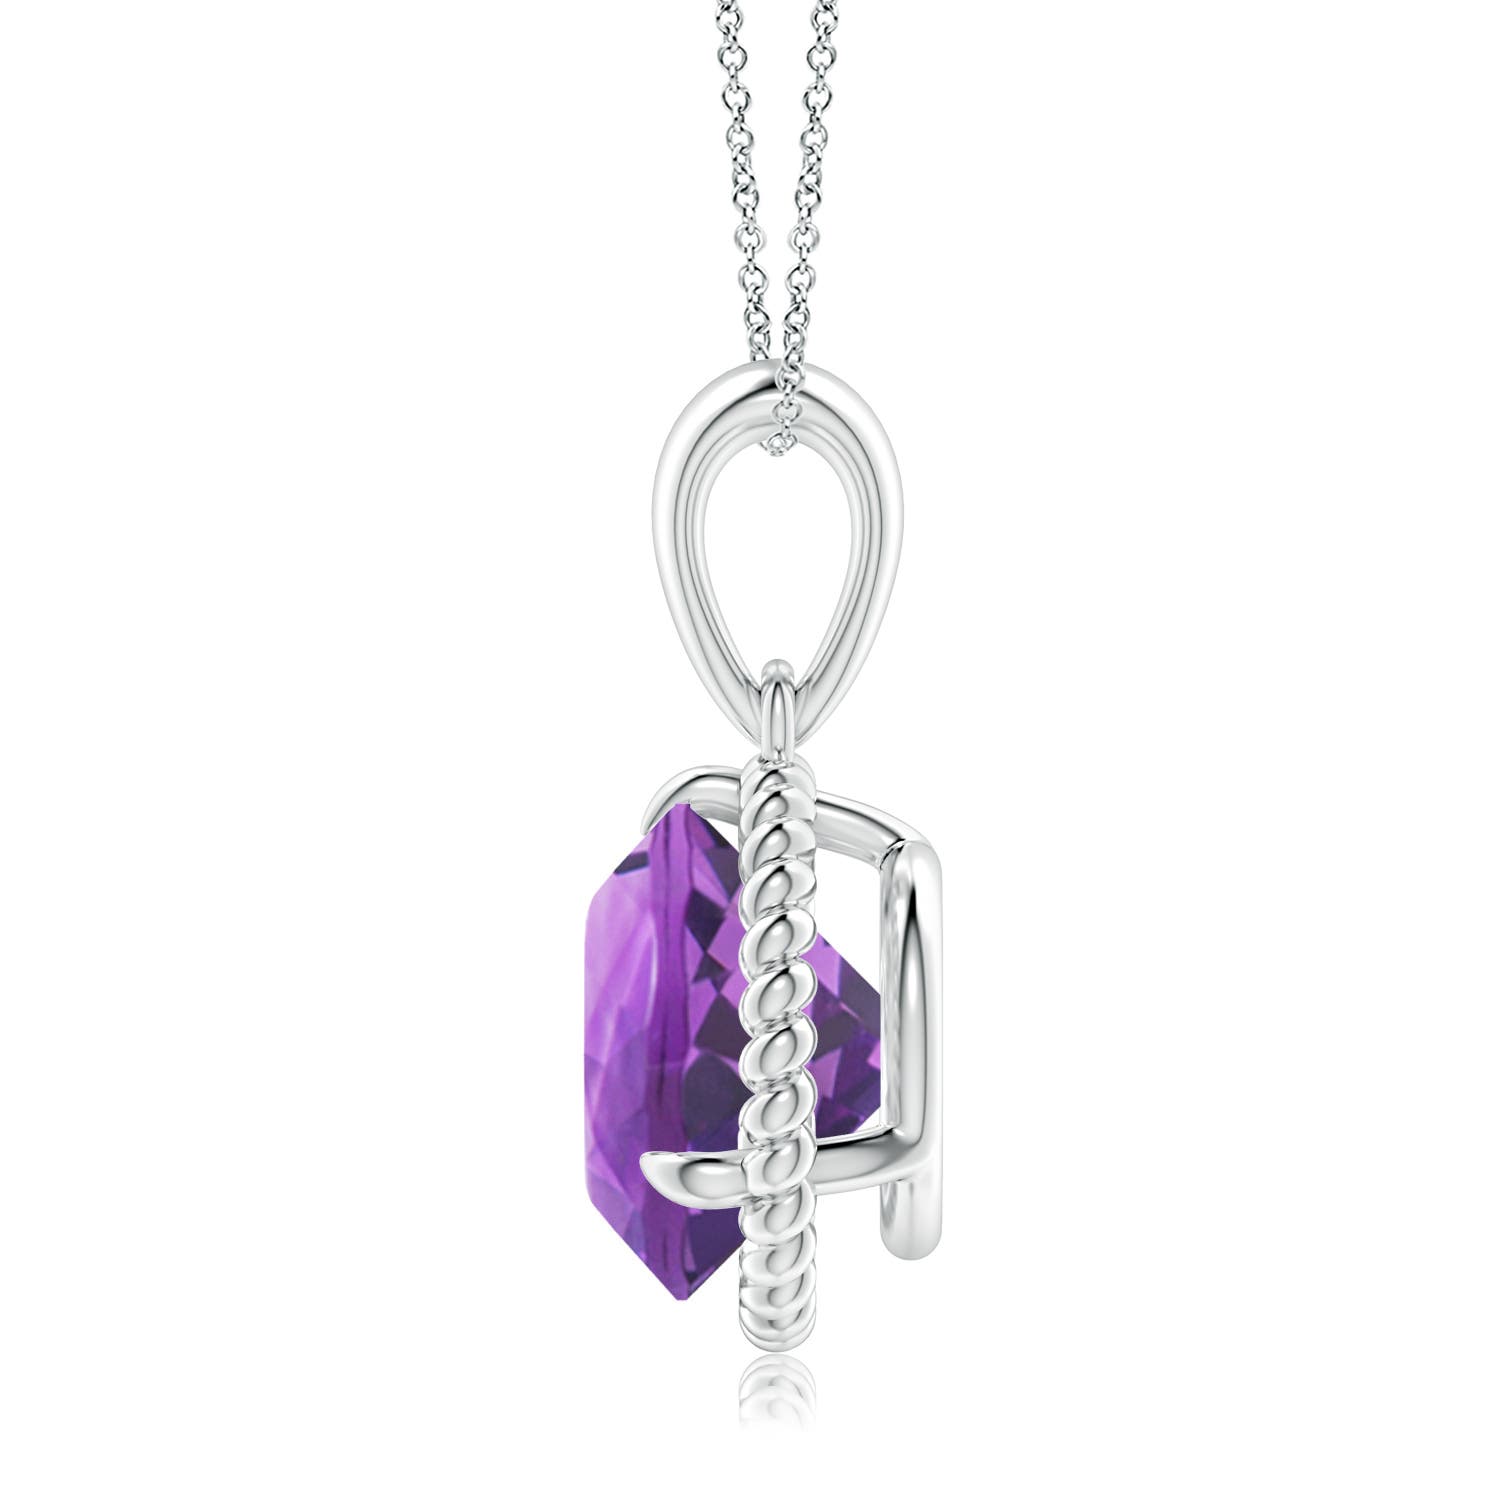 AA - Amethyst / 3.2 CT / 14 KT White Gold